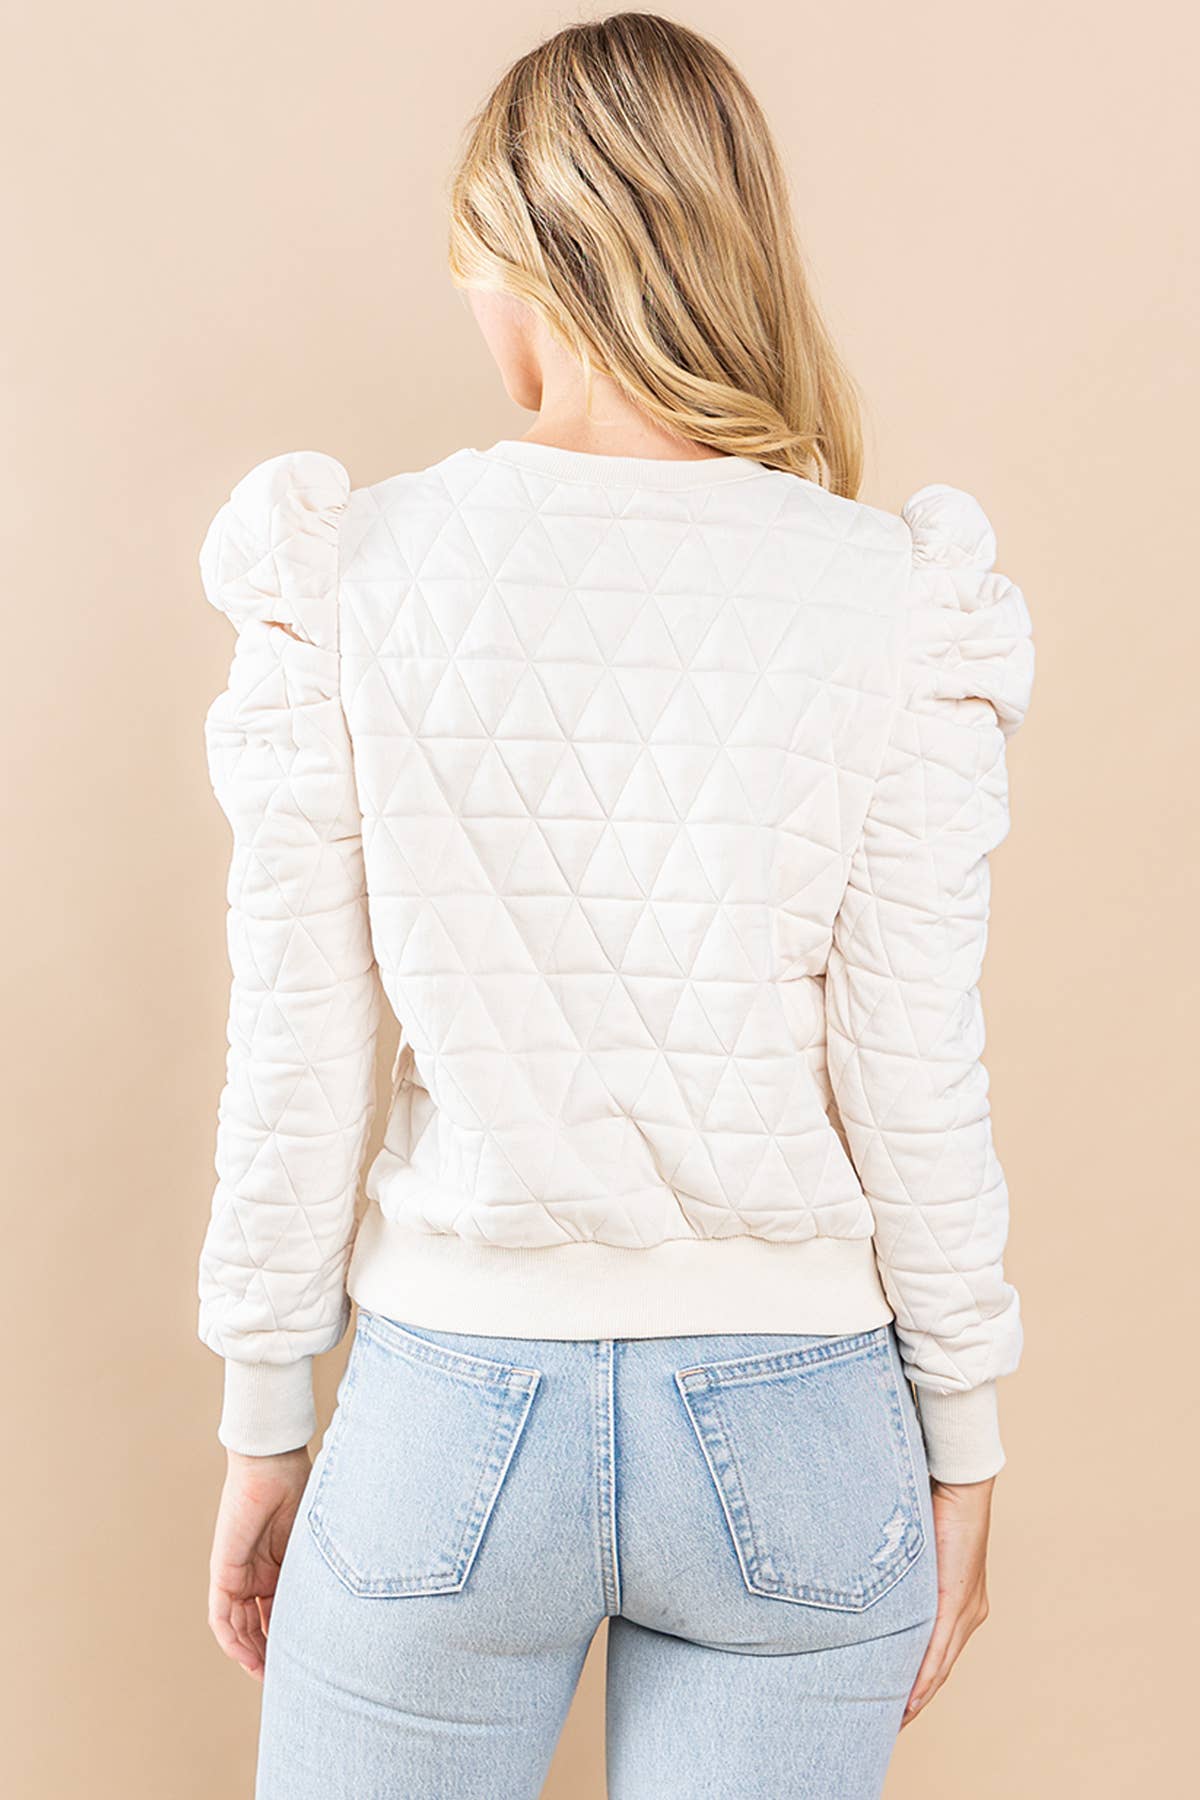 Katheryn Quilted Pull Over Top: Cream